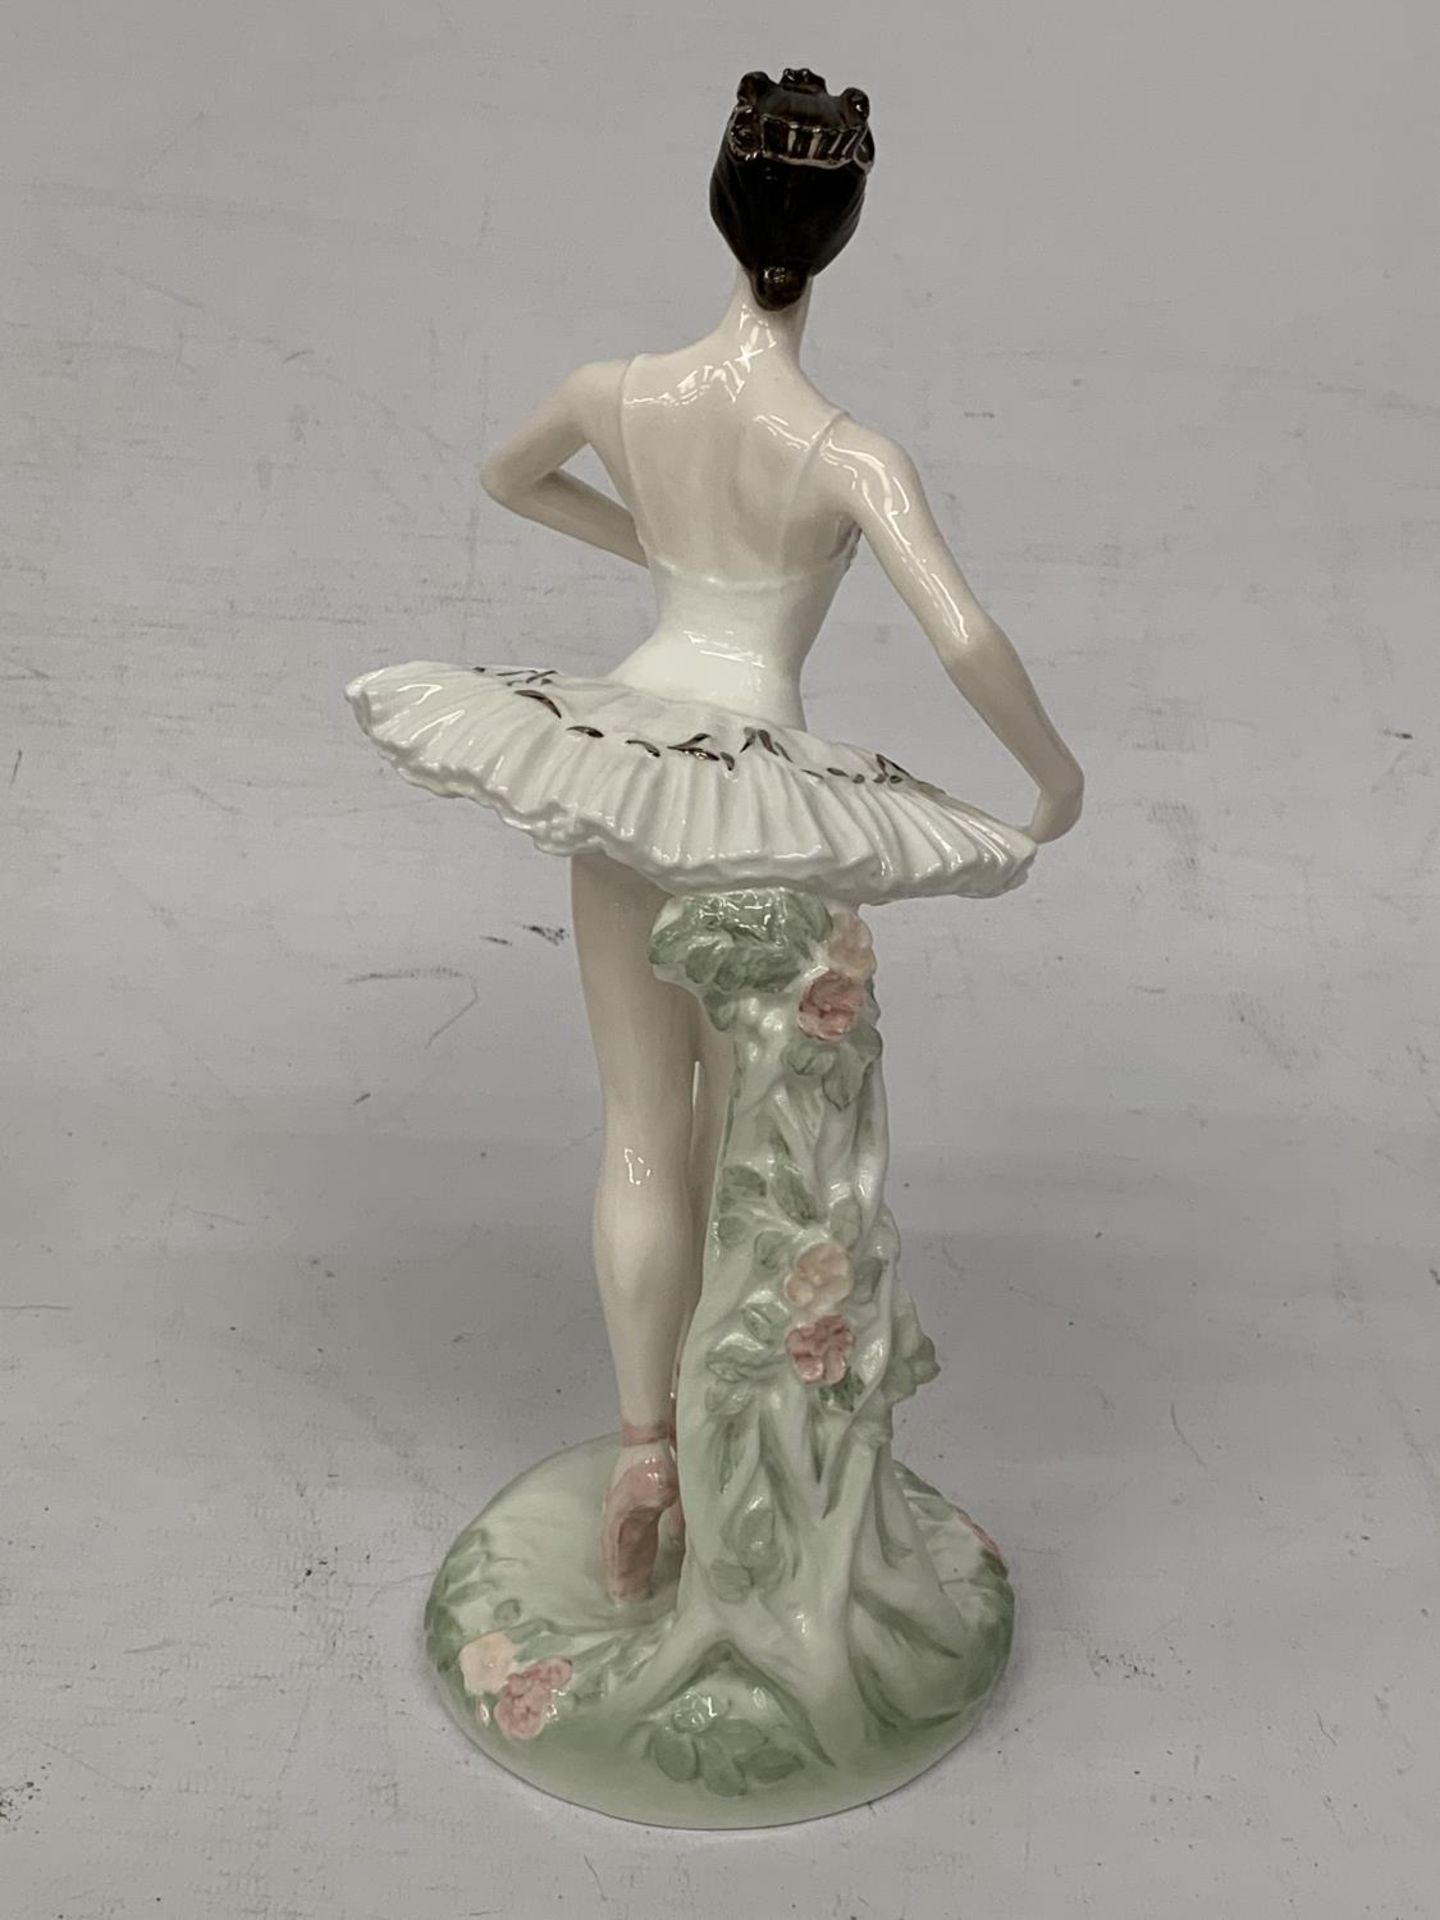 A COALPORT FIGURINE "DAME BERYL GREY" FROM THE ROYAL ACADEMY OF DANCING COLLECTION CELEBRATING THE - Bild 3 aus 5